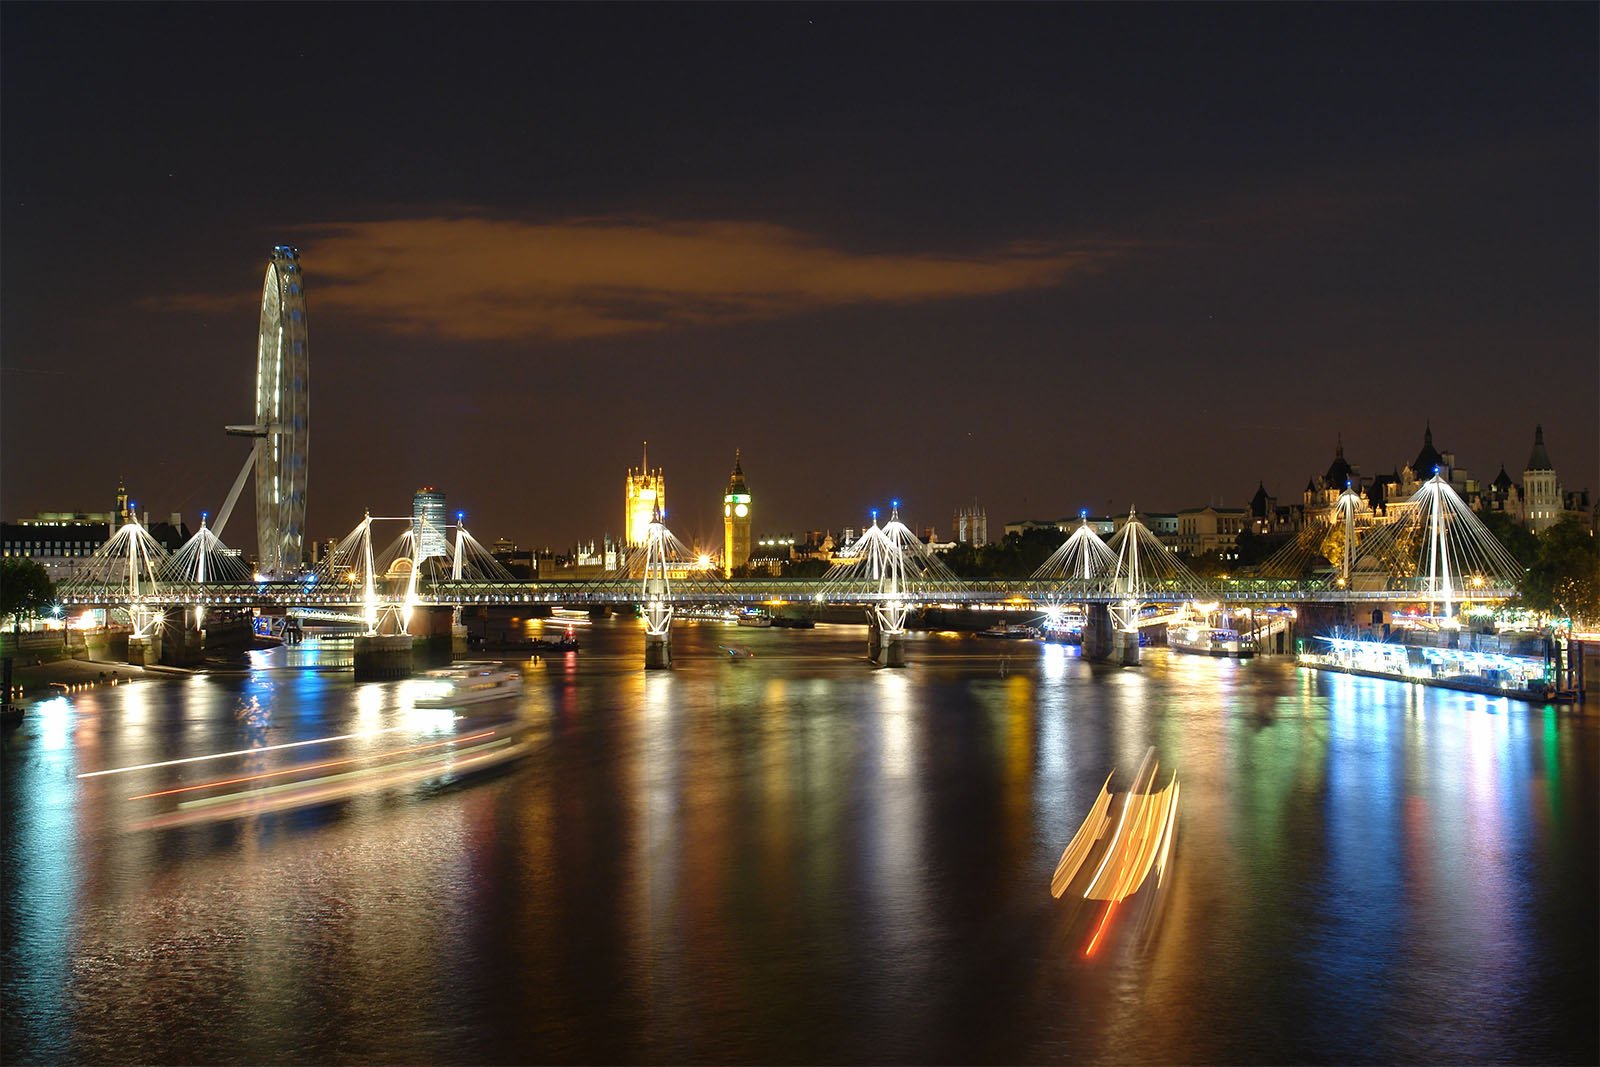 A nighttime view of the river thames in london, featuring the illuminated london eye and houses of parliament, with light trails from moving boats on the water.